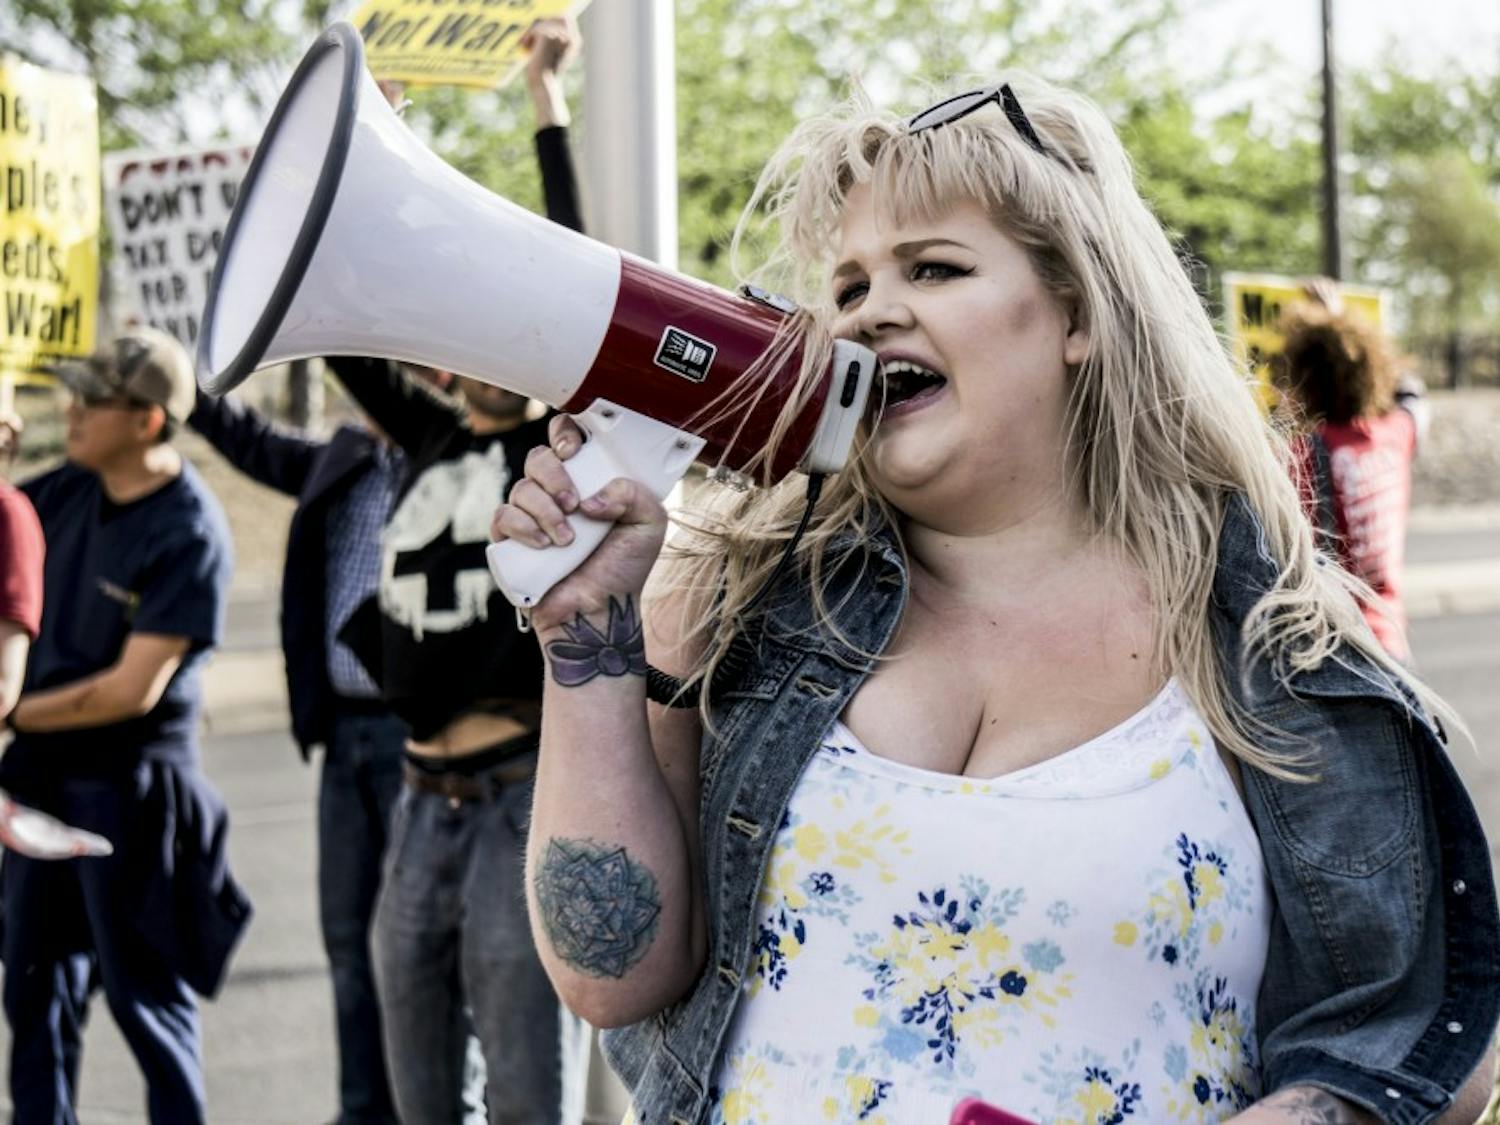 A protest organizer against the war in Syria leads a chant on a megaphone on the corner of Girard and San Mateo on Thursday, April 12, 2018. &nbsp;